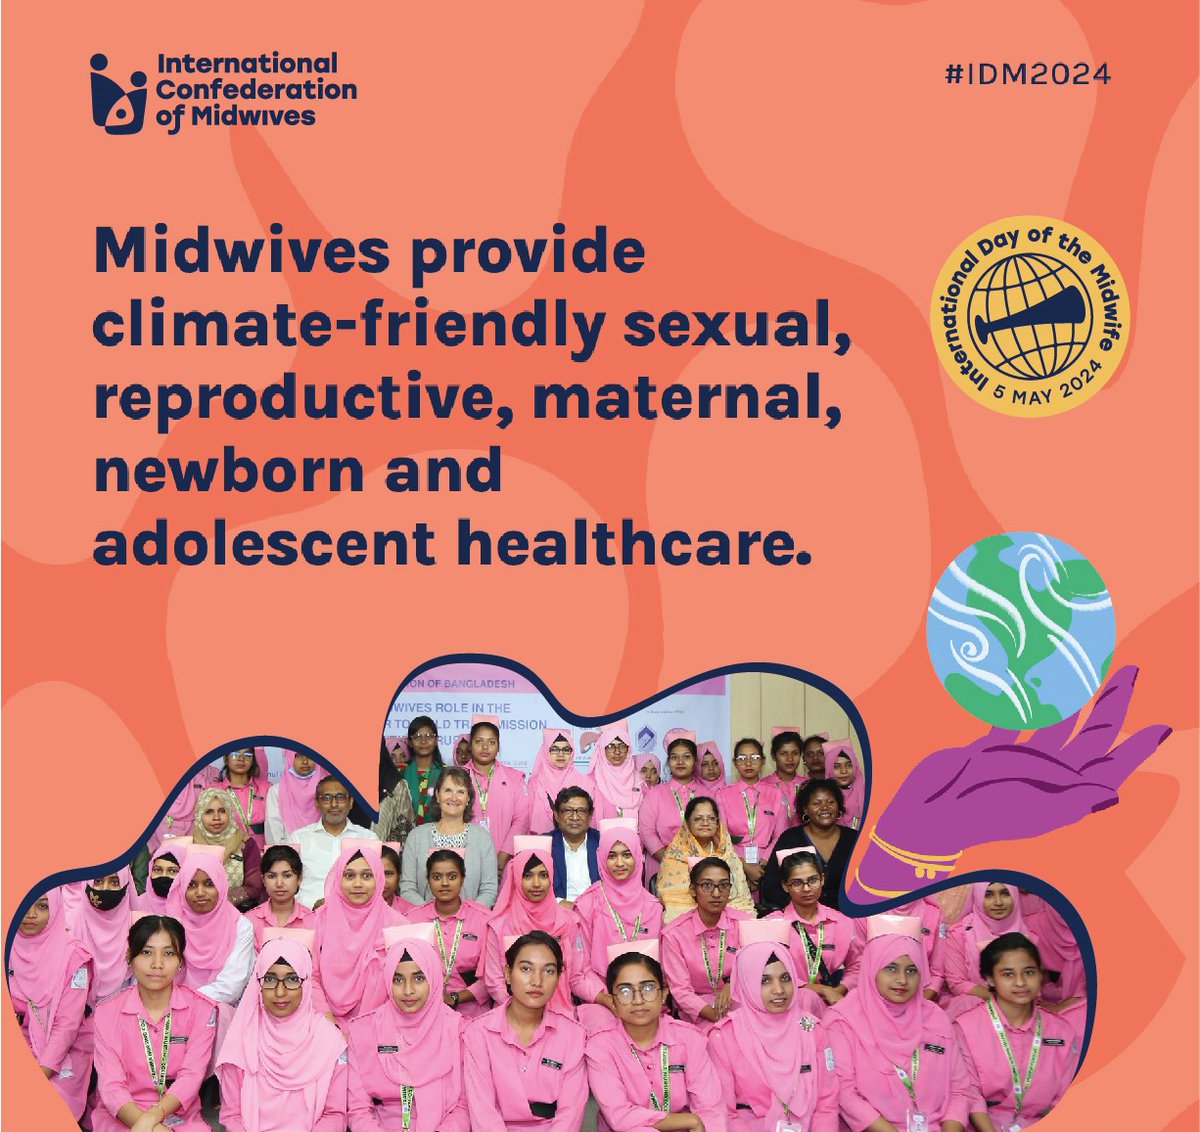 On #IDM2024 , we honor the invaluable dedication of midwifery professionals worldwide. Recognizing their vital role, we anticipate their pivotal contribution to #PMTCT of viral #hepatitis in Bangladesh 🇧🇩. Let's unite in the effort to eradicate viral hepatitis.